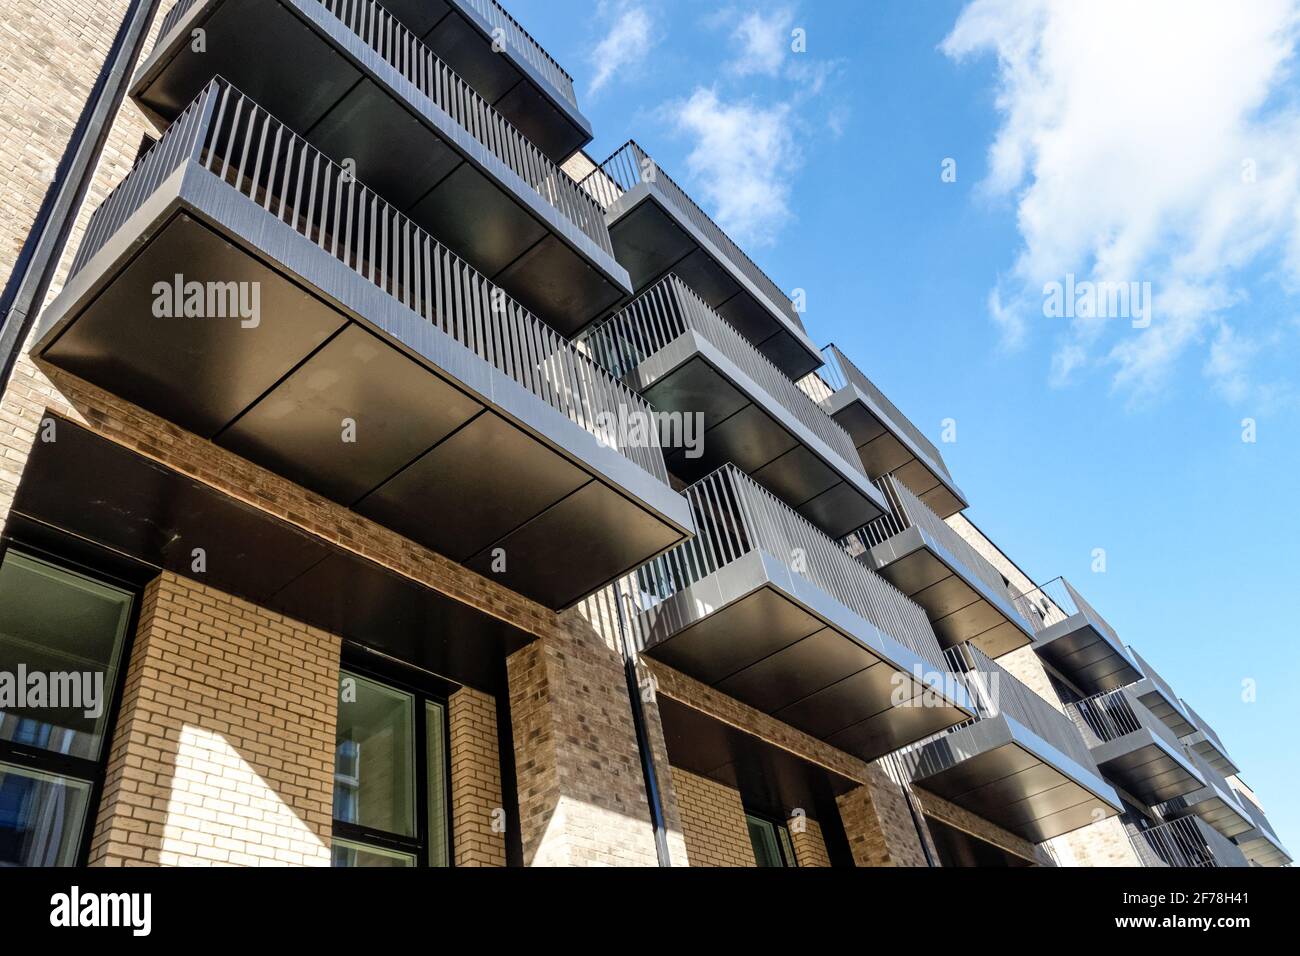 Exterior of new modern apartment buildings in London, England United Kingdom UK Stock Photo